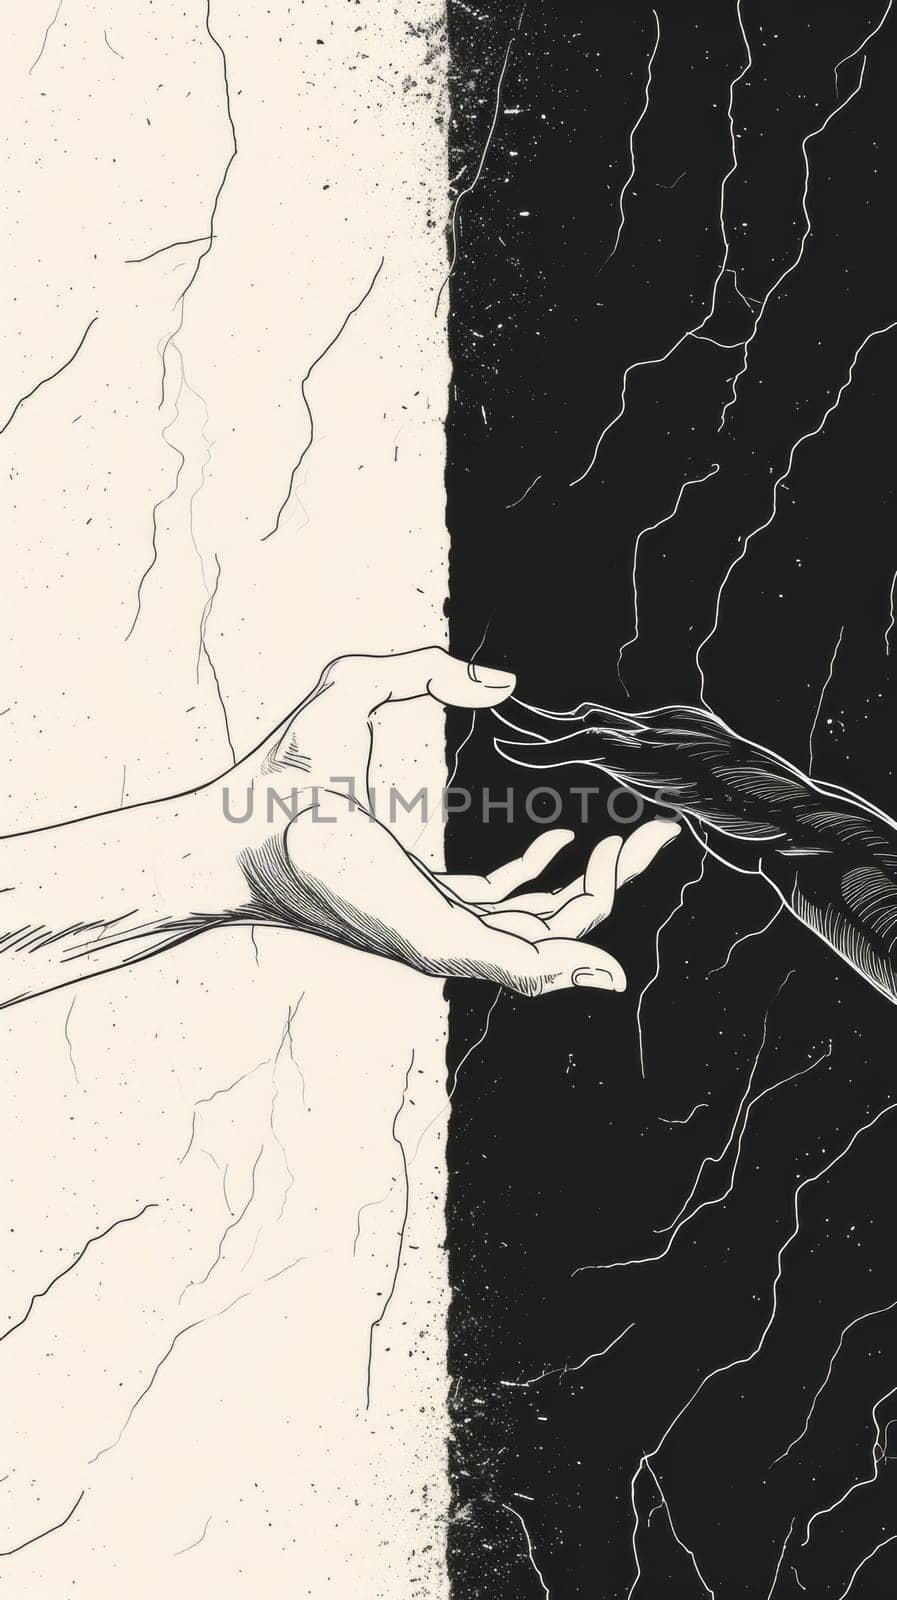 A drawing of two hands reaching for each other in a black and white image, AI by starush